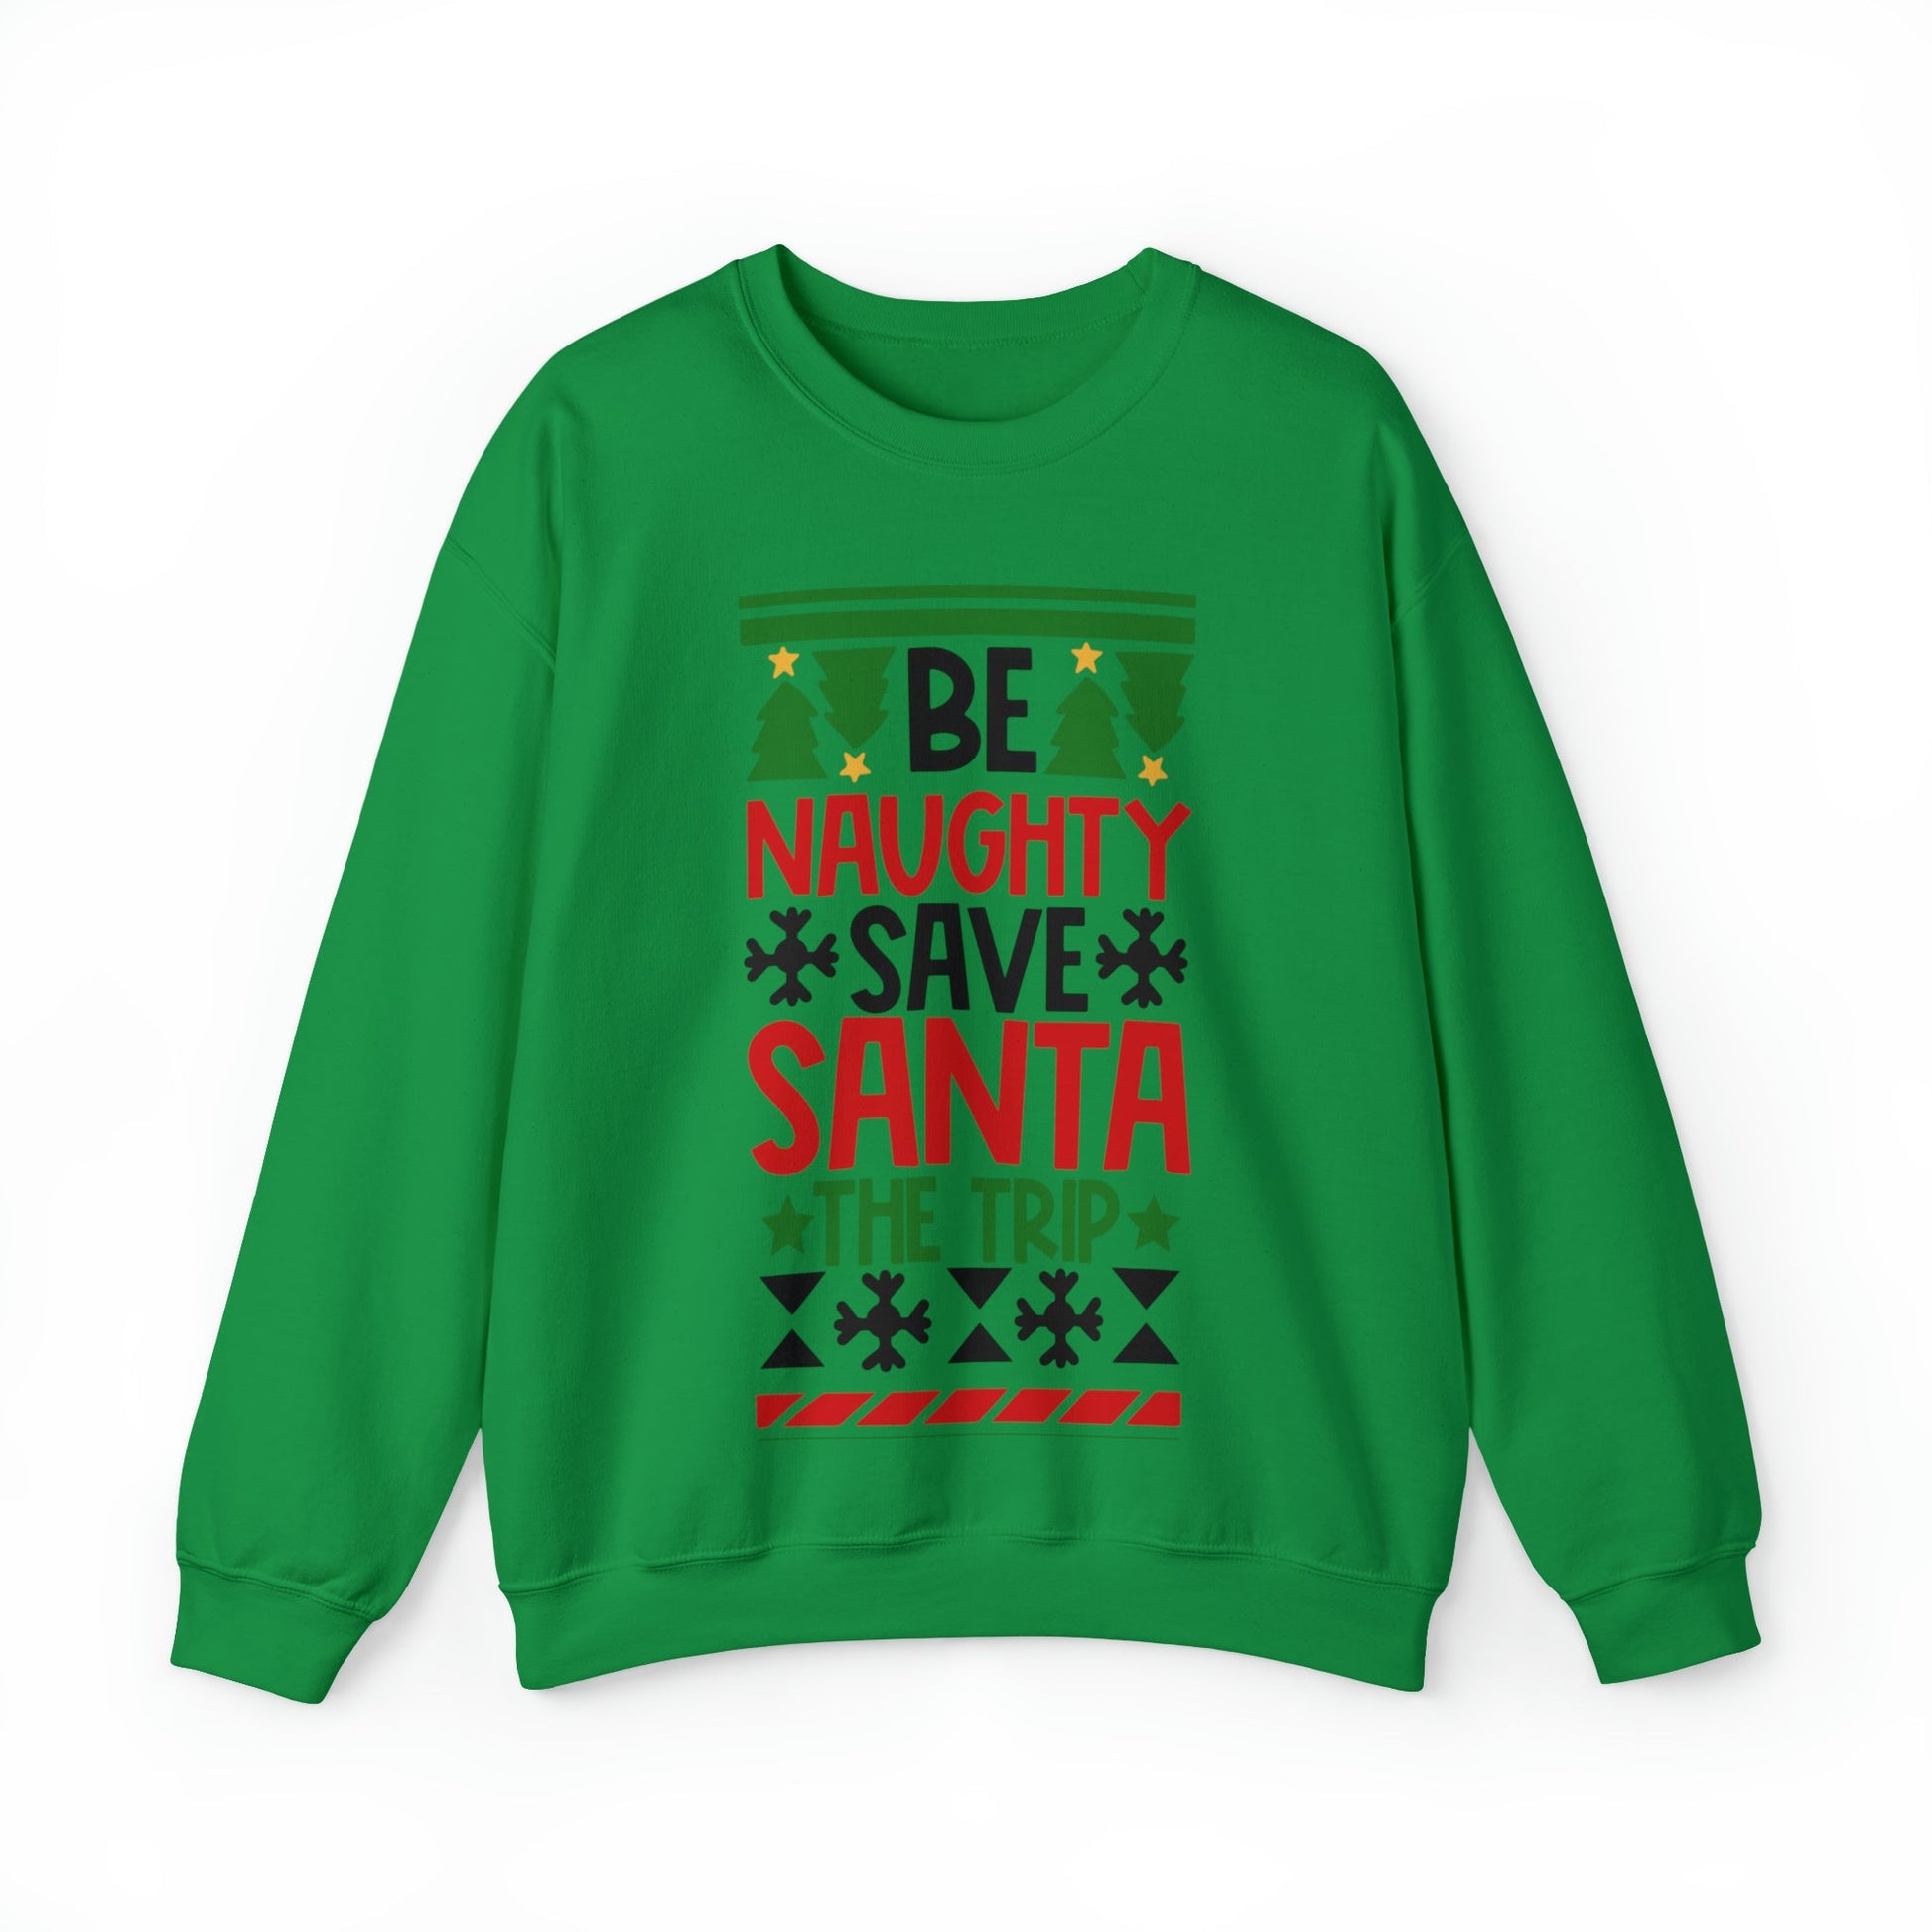 Get trendy with Be naughty Save Santa the Trip Ugly Christmas Sweater - Sweatshirt available at Good Gift Company. Grab yours for $29.99 today!